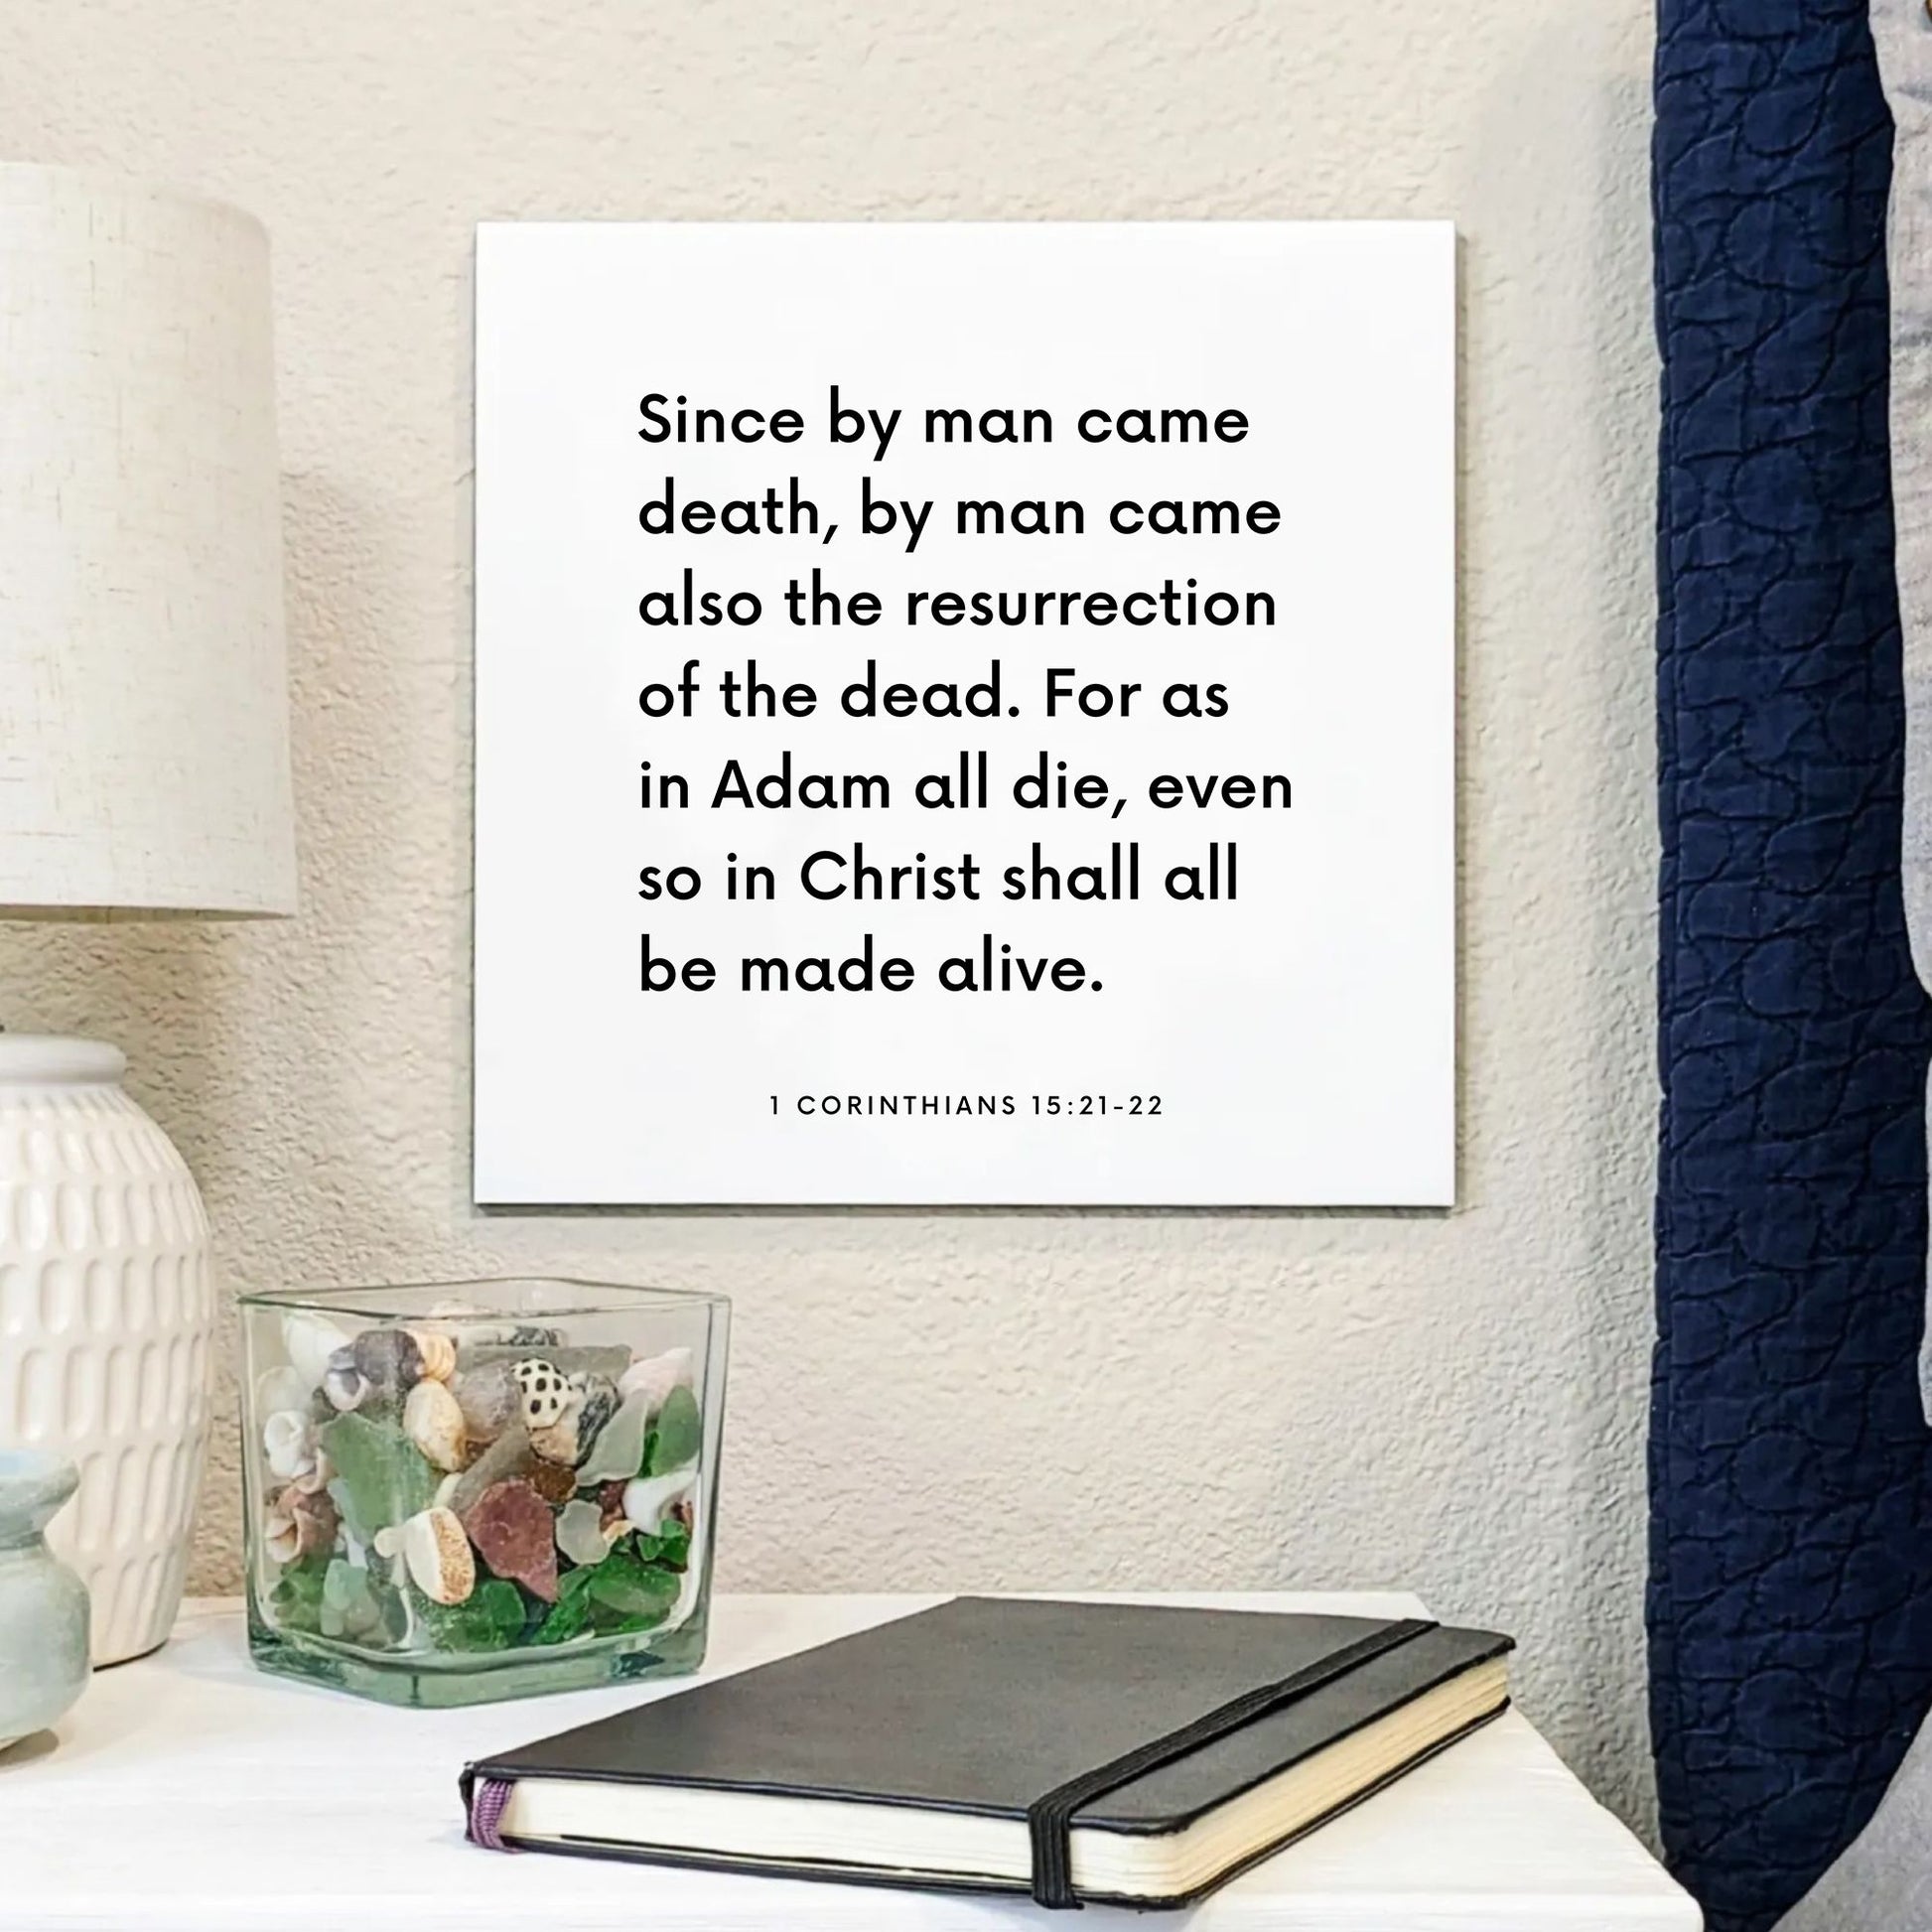 Bedside mouting of the scripture tile for 1 Corinthians 15:21-22 - "Since by man came death, by man came also the resurrection"